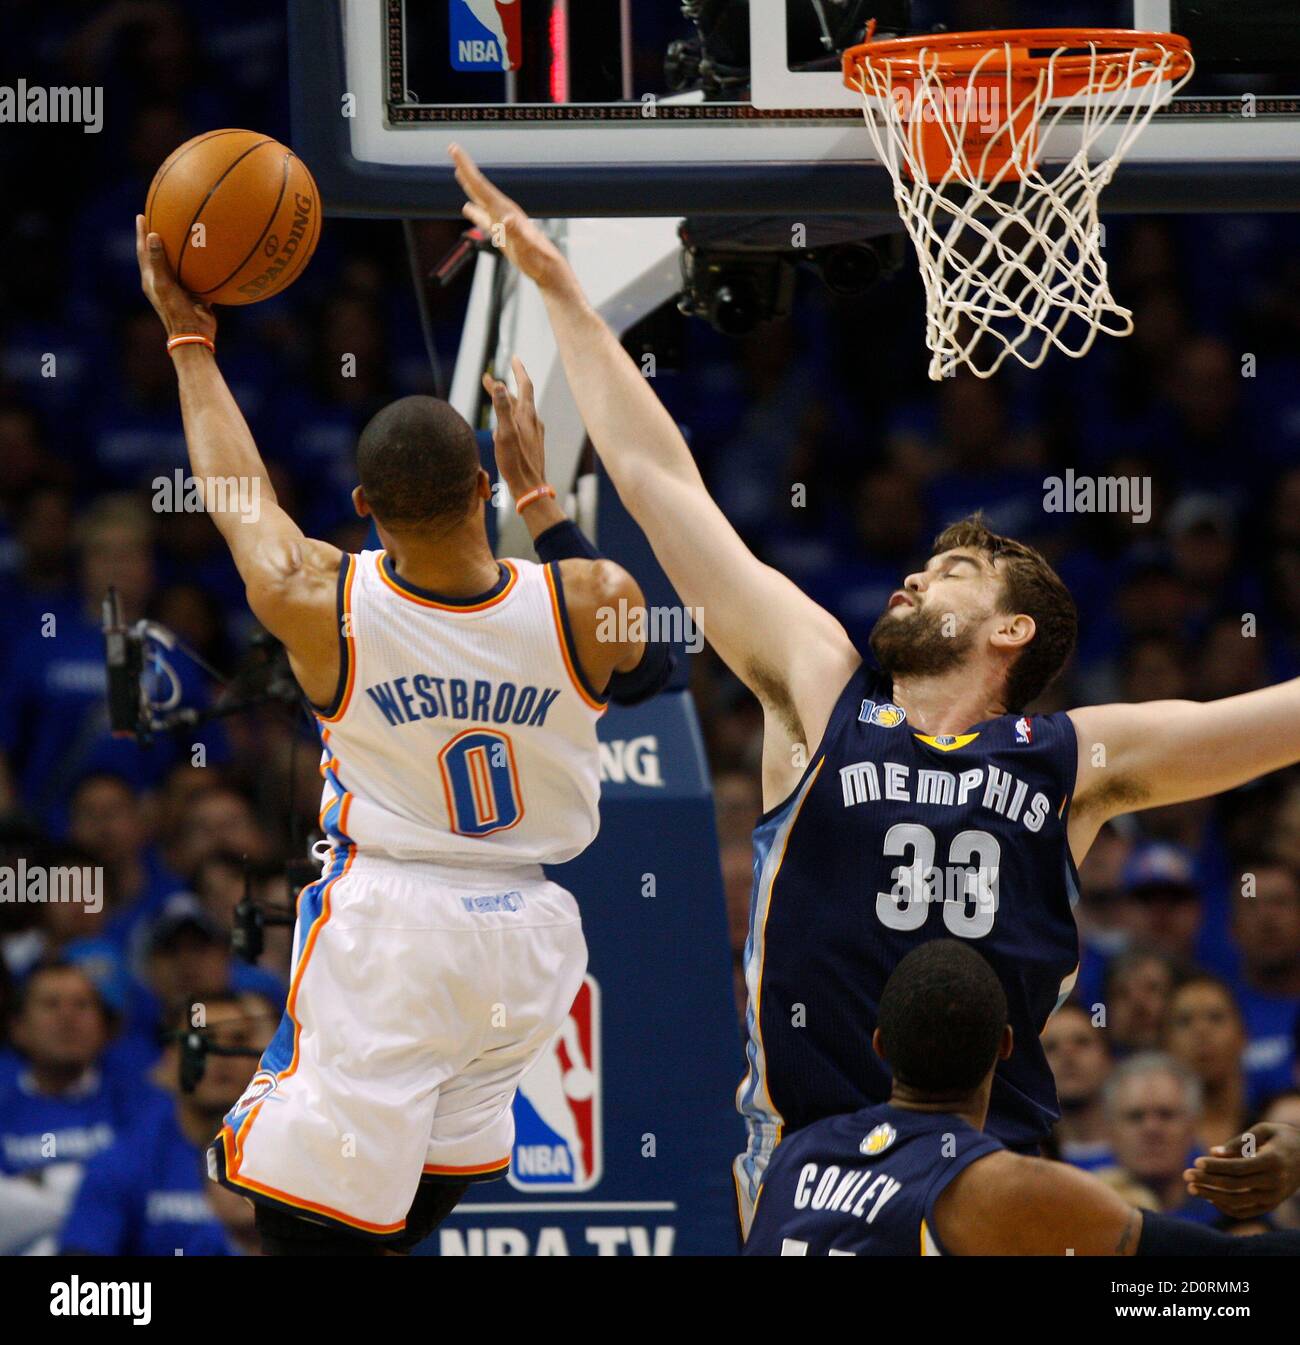 Oklahoma City Thunder guard Russell Westbrook (L) scores against Memphis  Grizzlies center Marc Gasol of Spain (R) in the first half of Game 2 of  their second round Western Conference NBA basketball